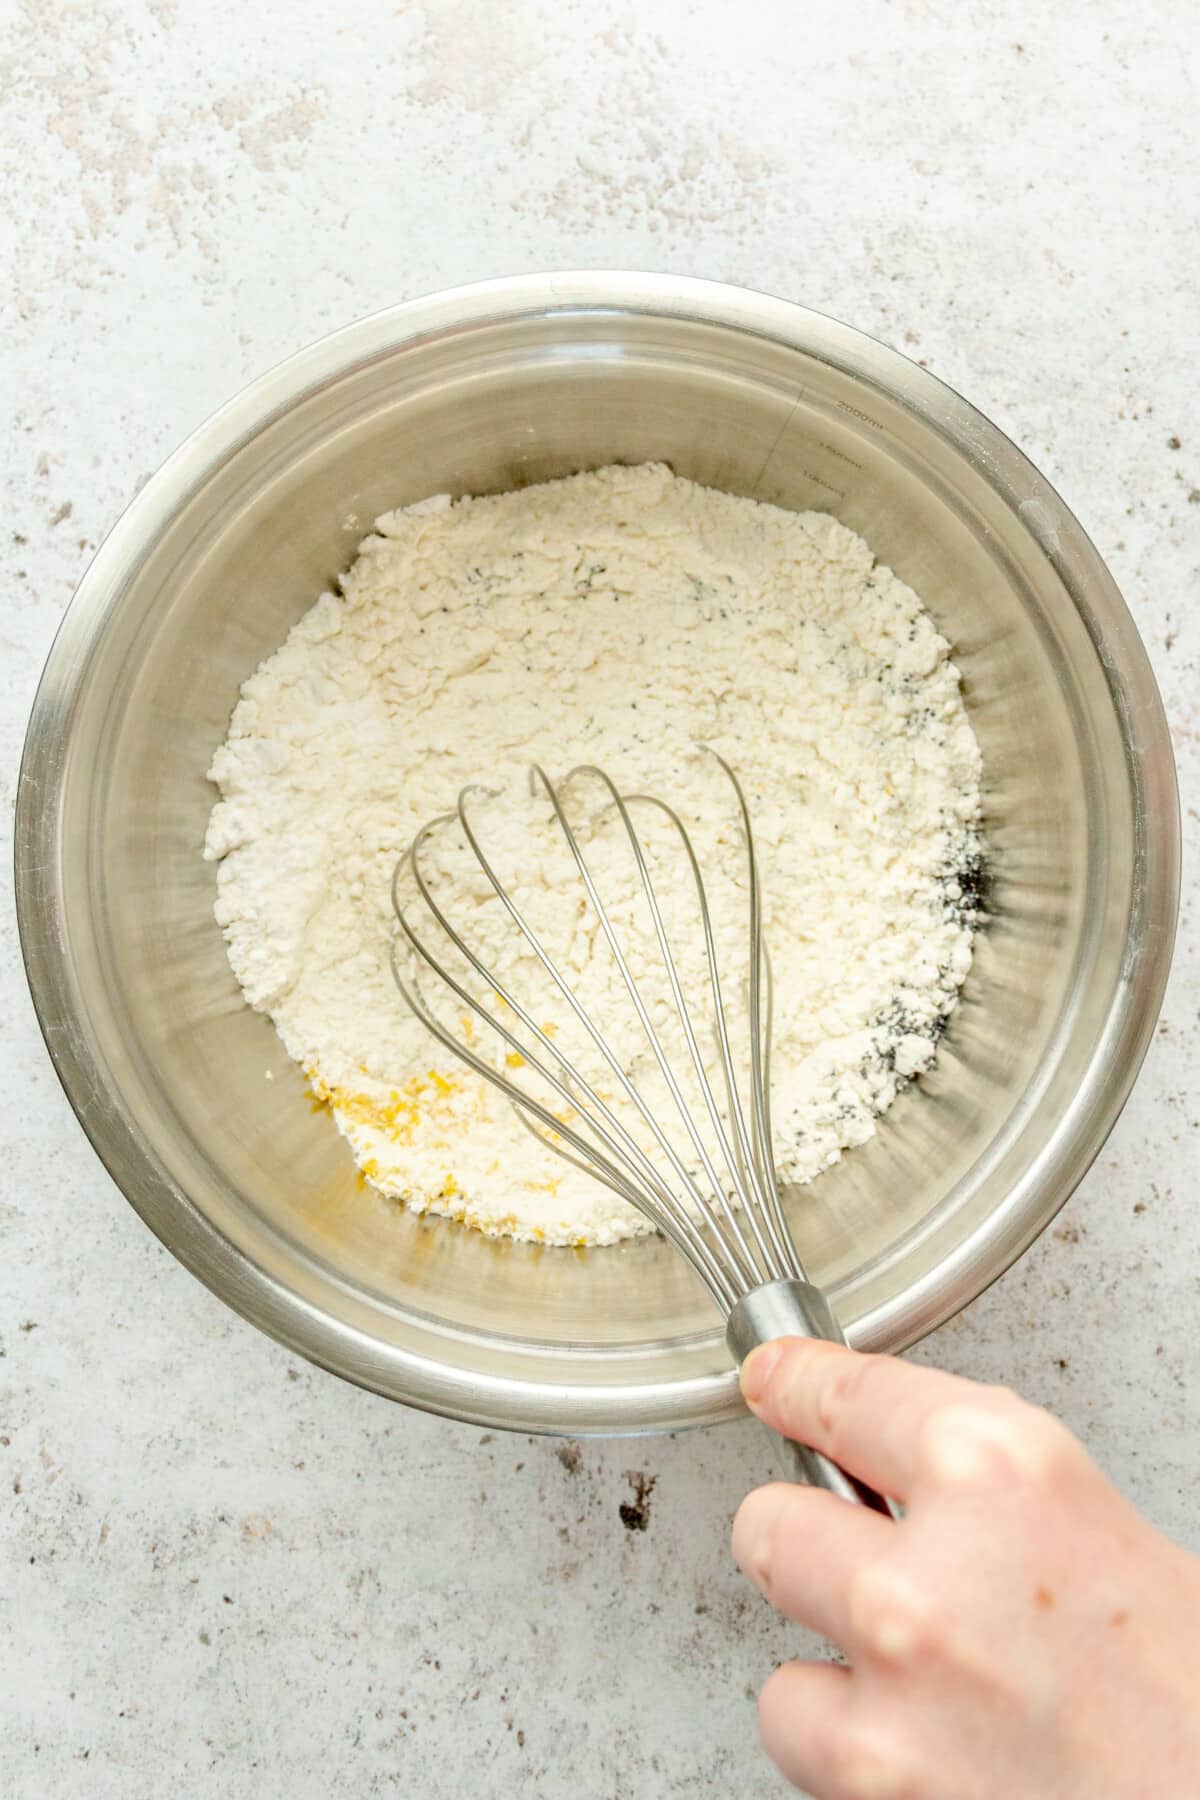 Dry ingredients are whisked for a lemon poppy seed loaf in a stainless steel bowl on a light grey surface.